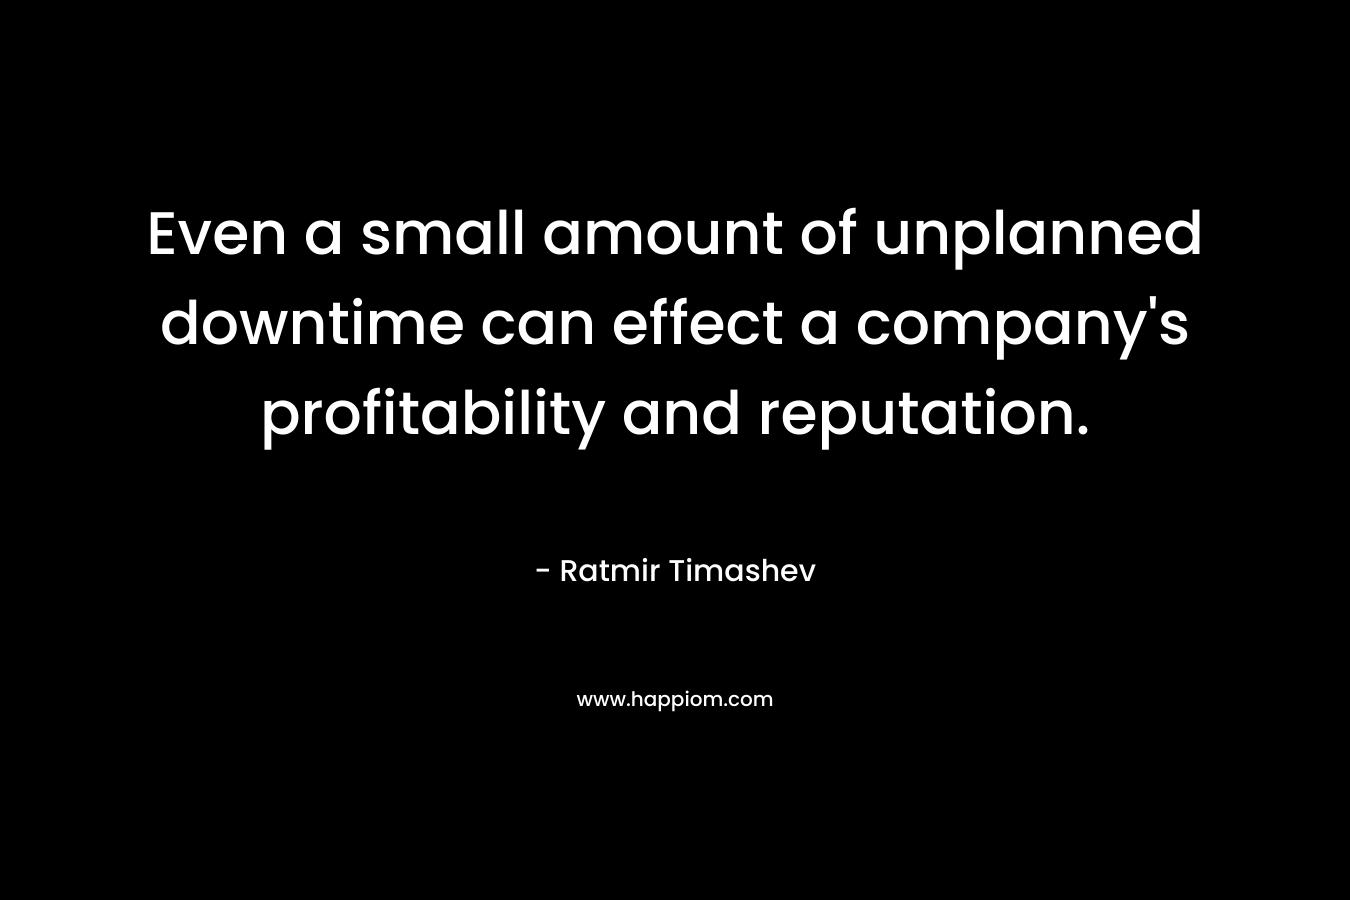 Even a small amount of unplanned downtime can effect a company's profitability and reputation.